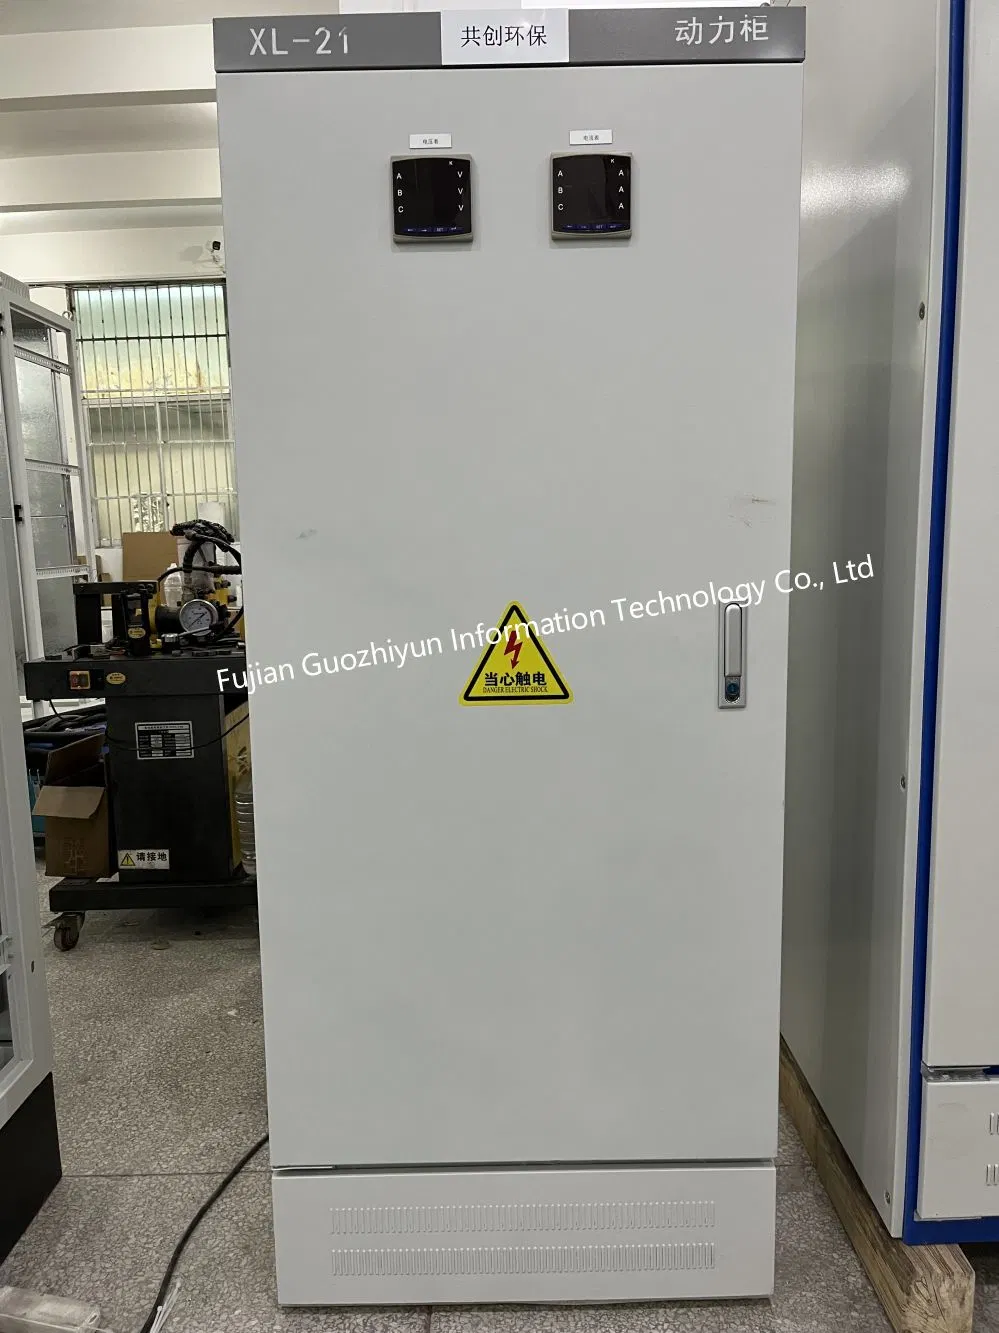 400A Main Electrical Control Cabinet Three Branches